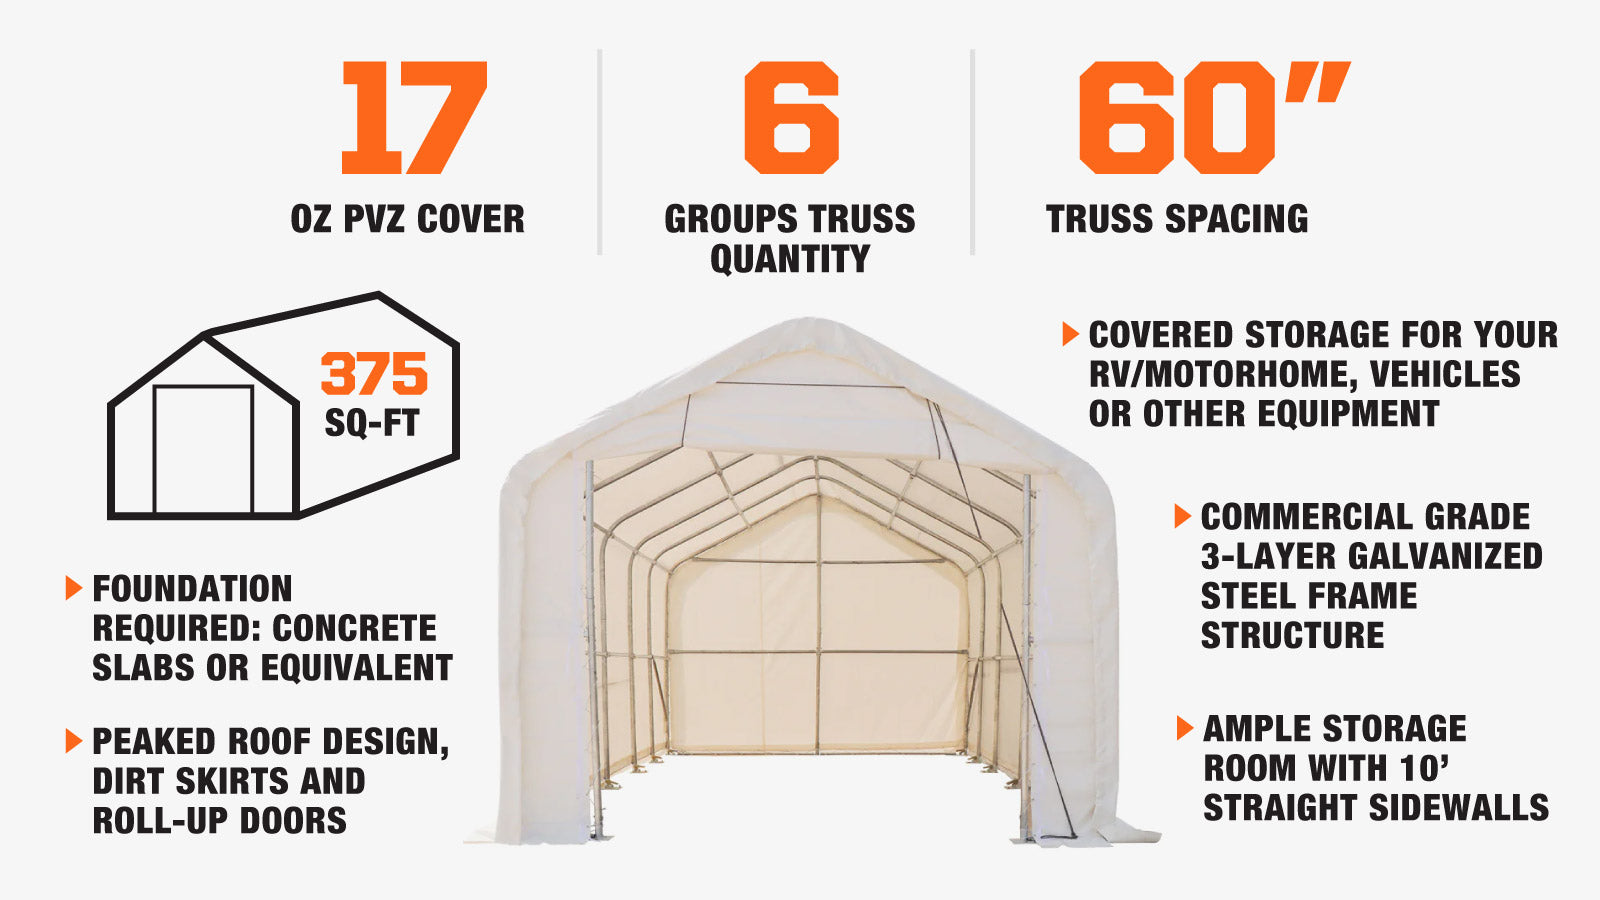 TMG Industrial 15’ x 25’ RV/Motorhome Storage Shelter, 17 oz PVC Fabric Cover, Front Roll-Up Door, Enclosed Rear Wall, 3-Layer Galvanized Steel Frame, 10’ Straight Sidewalls, TMG-ST1525-description-image